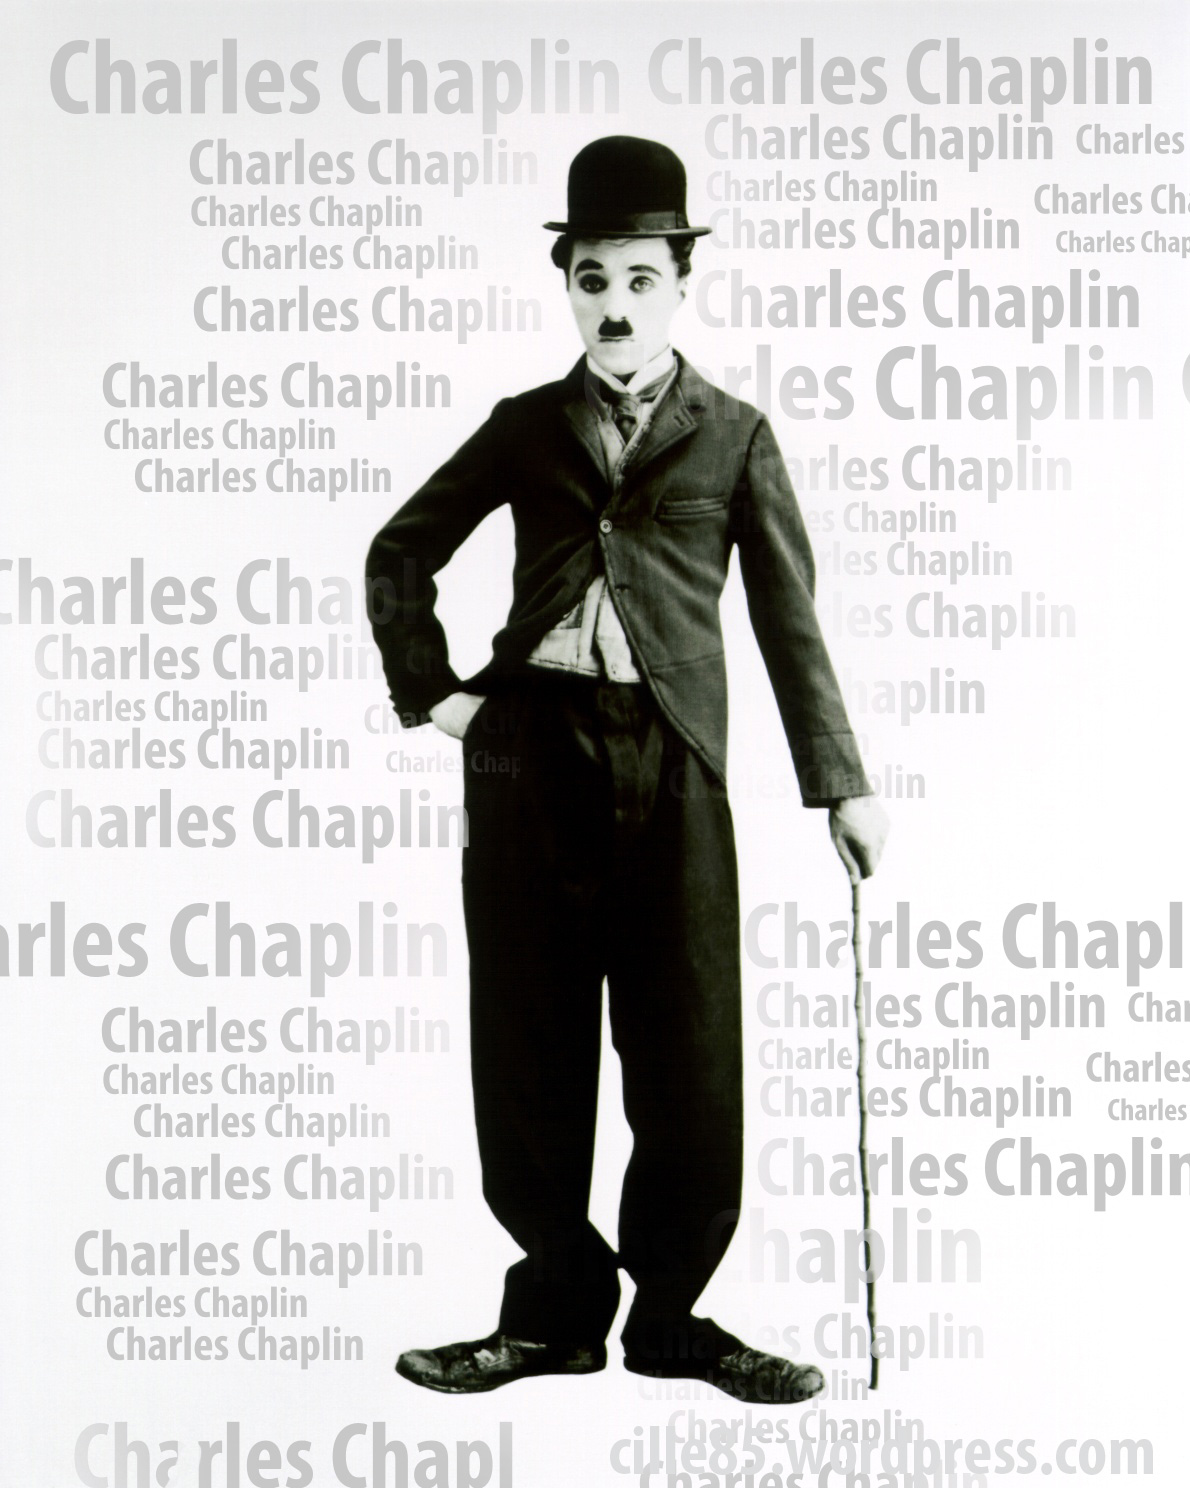 Charles Chaplin - Images